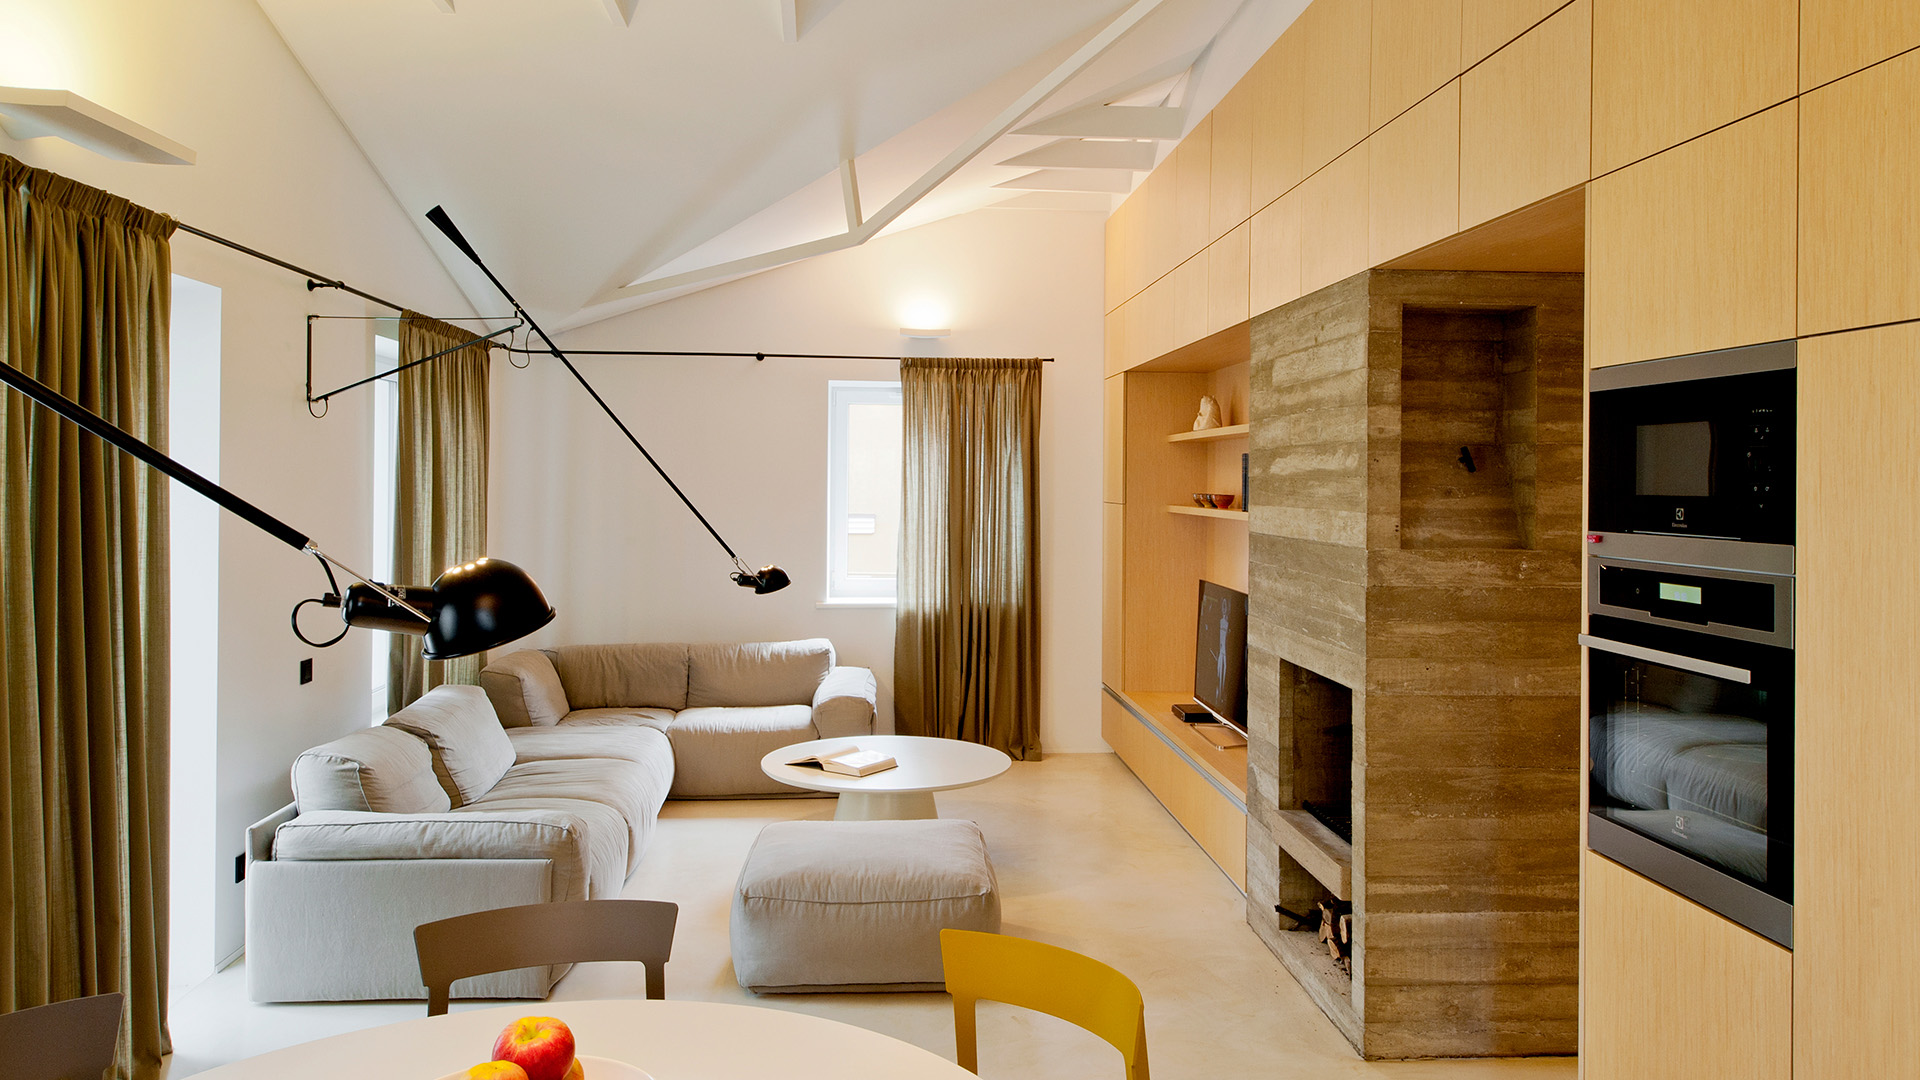 265 Wall/Ceiling Lamp, Lifestyle